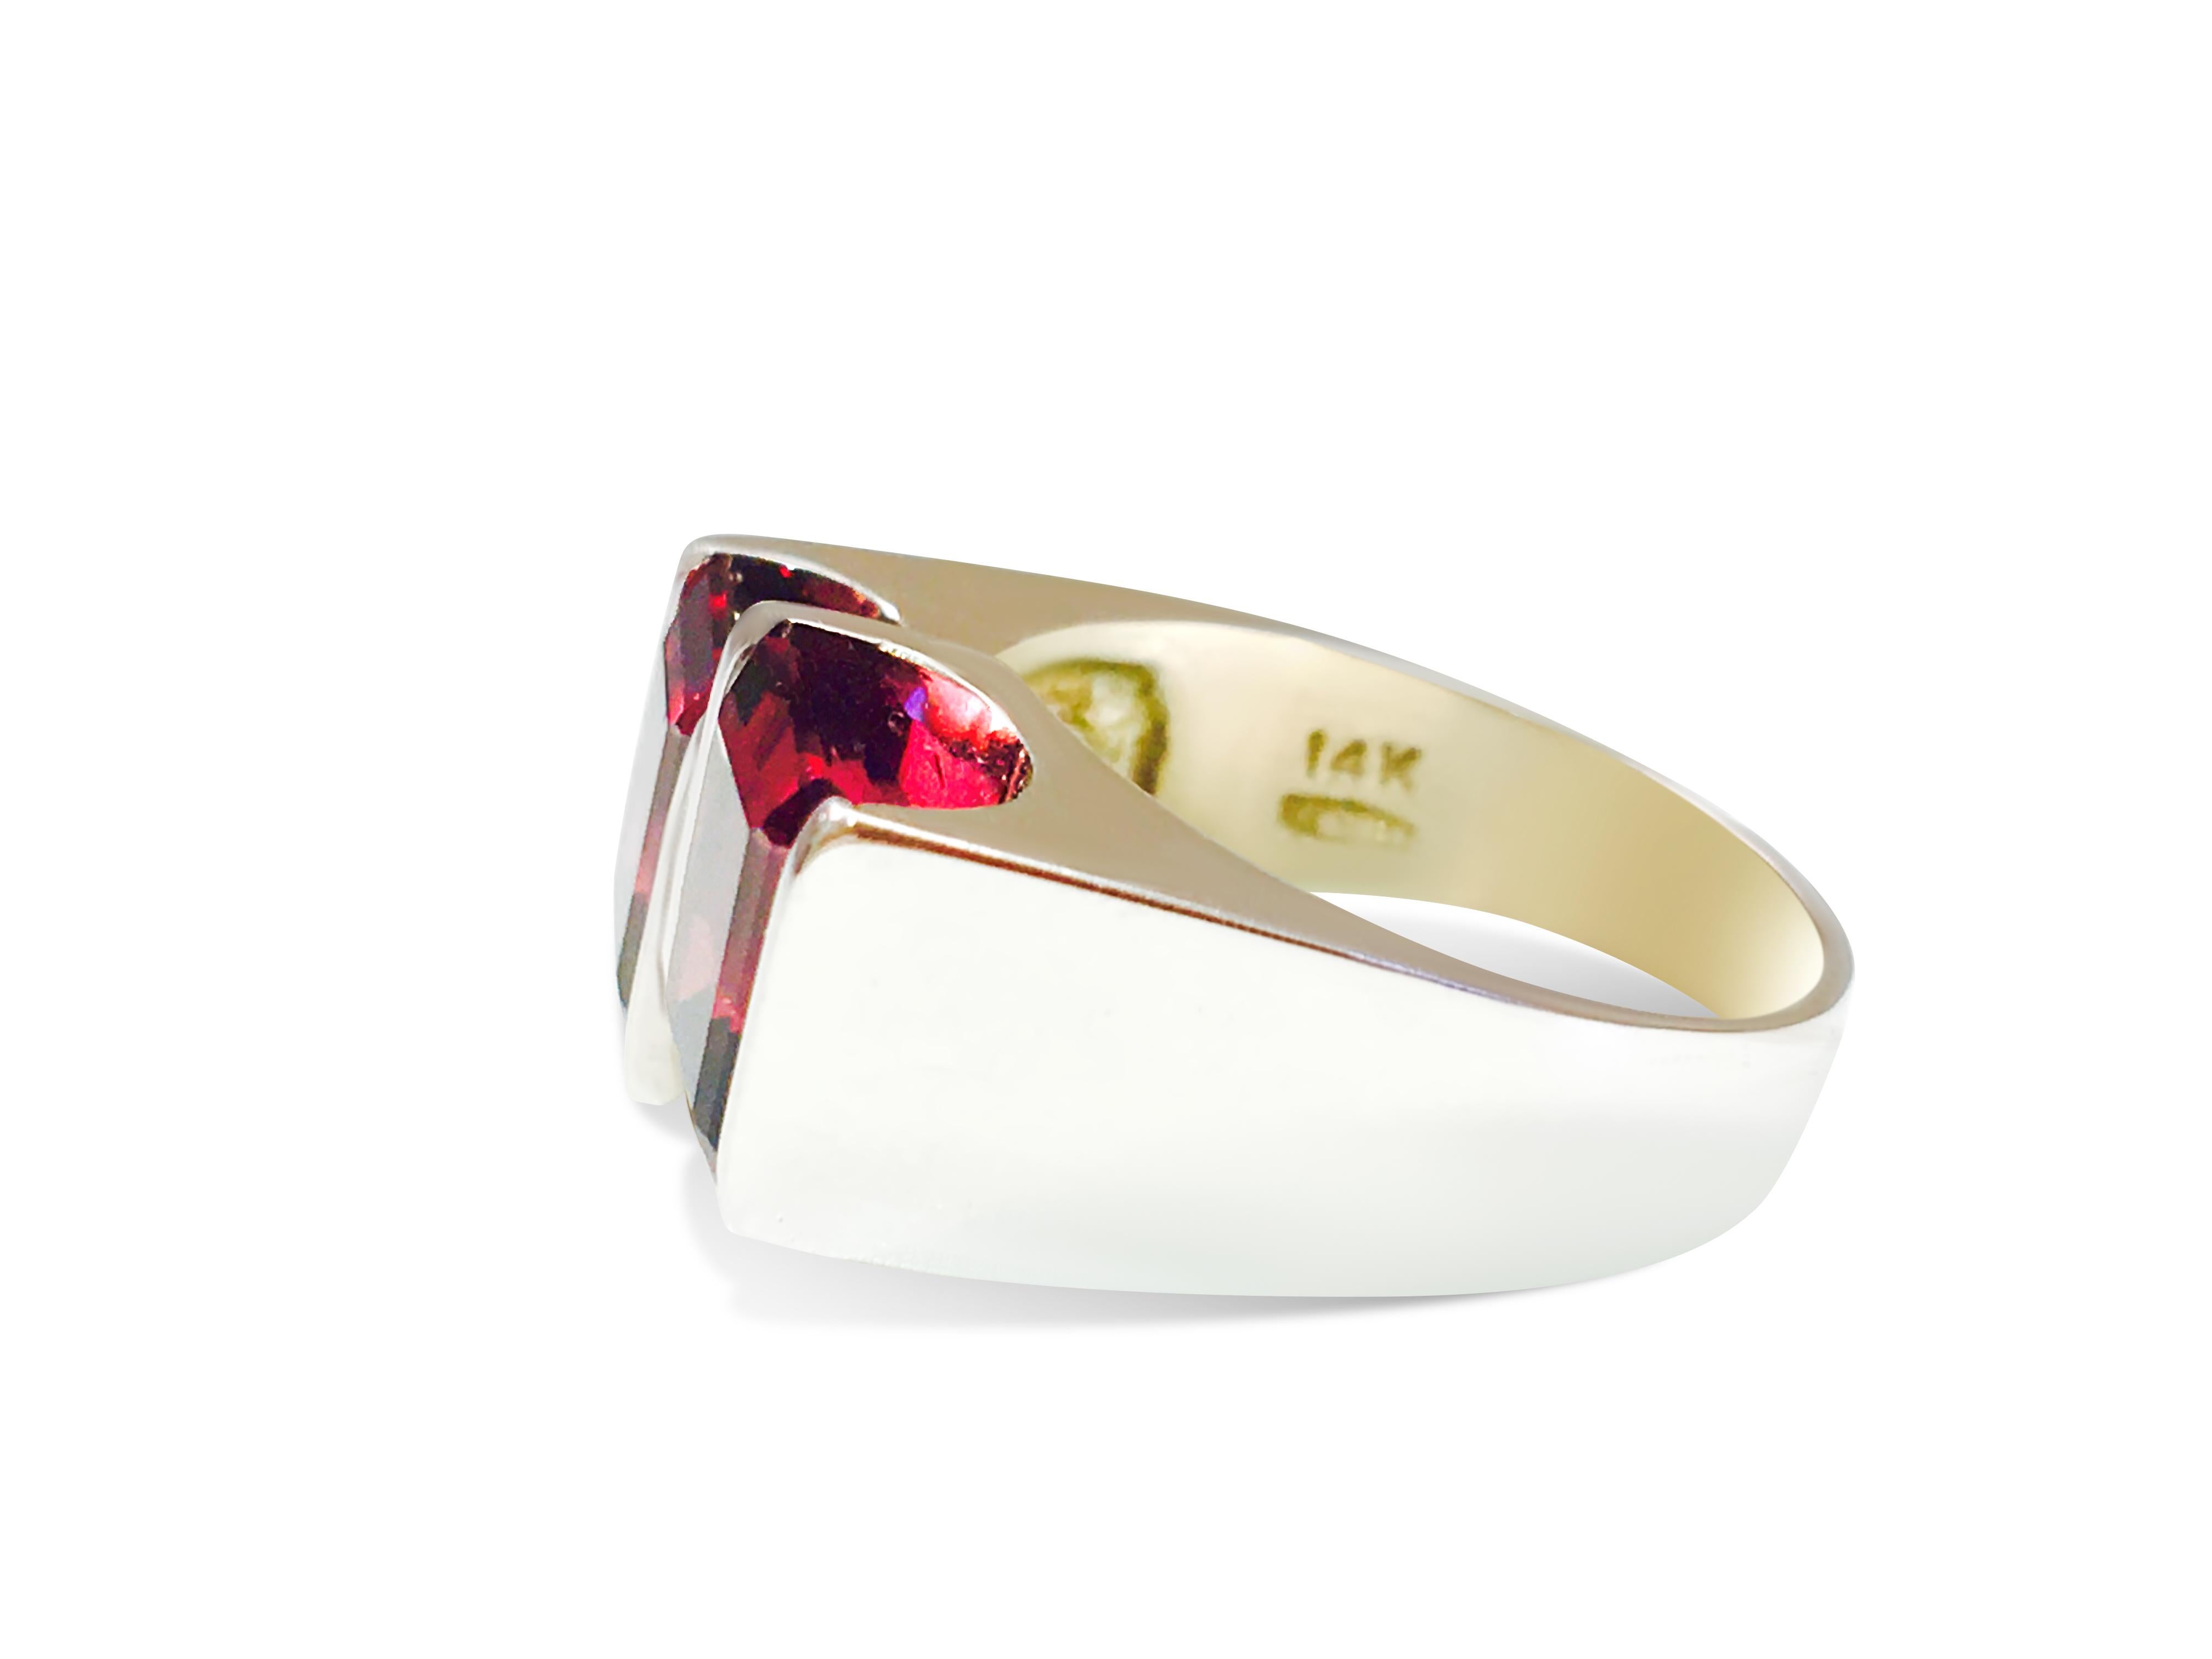 14K Gold 7 Carat Natural Garnet and Diamond Ring. In Excellent Condition For Sale In Miami, FL